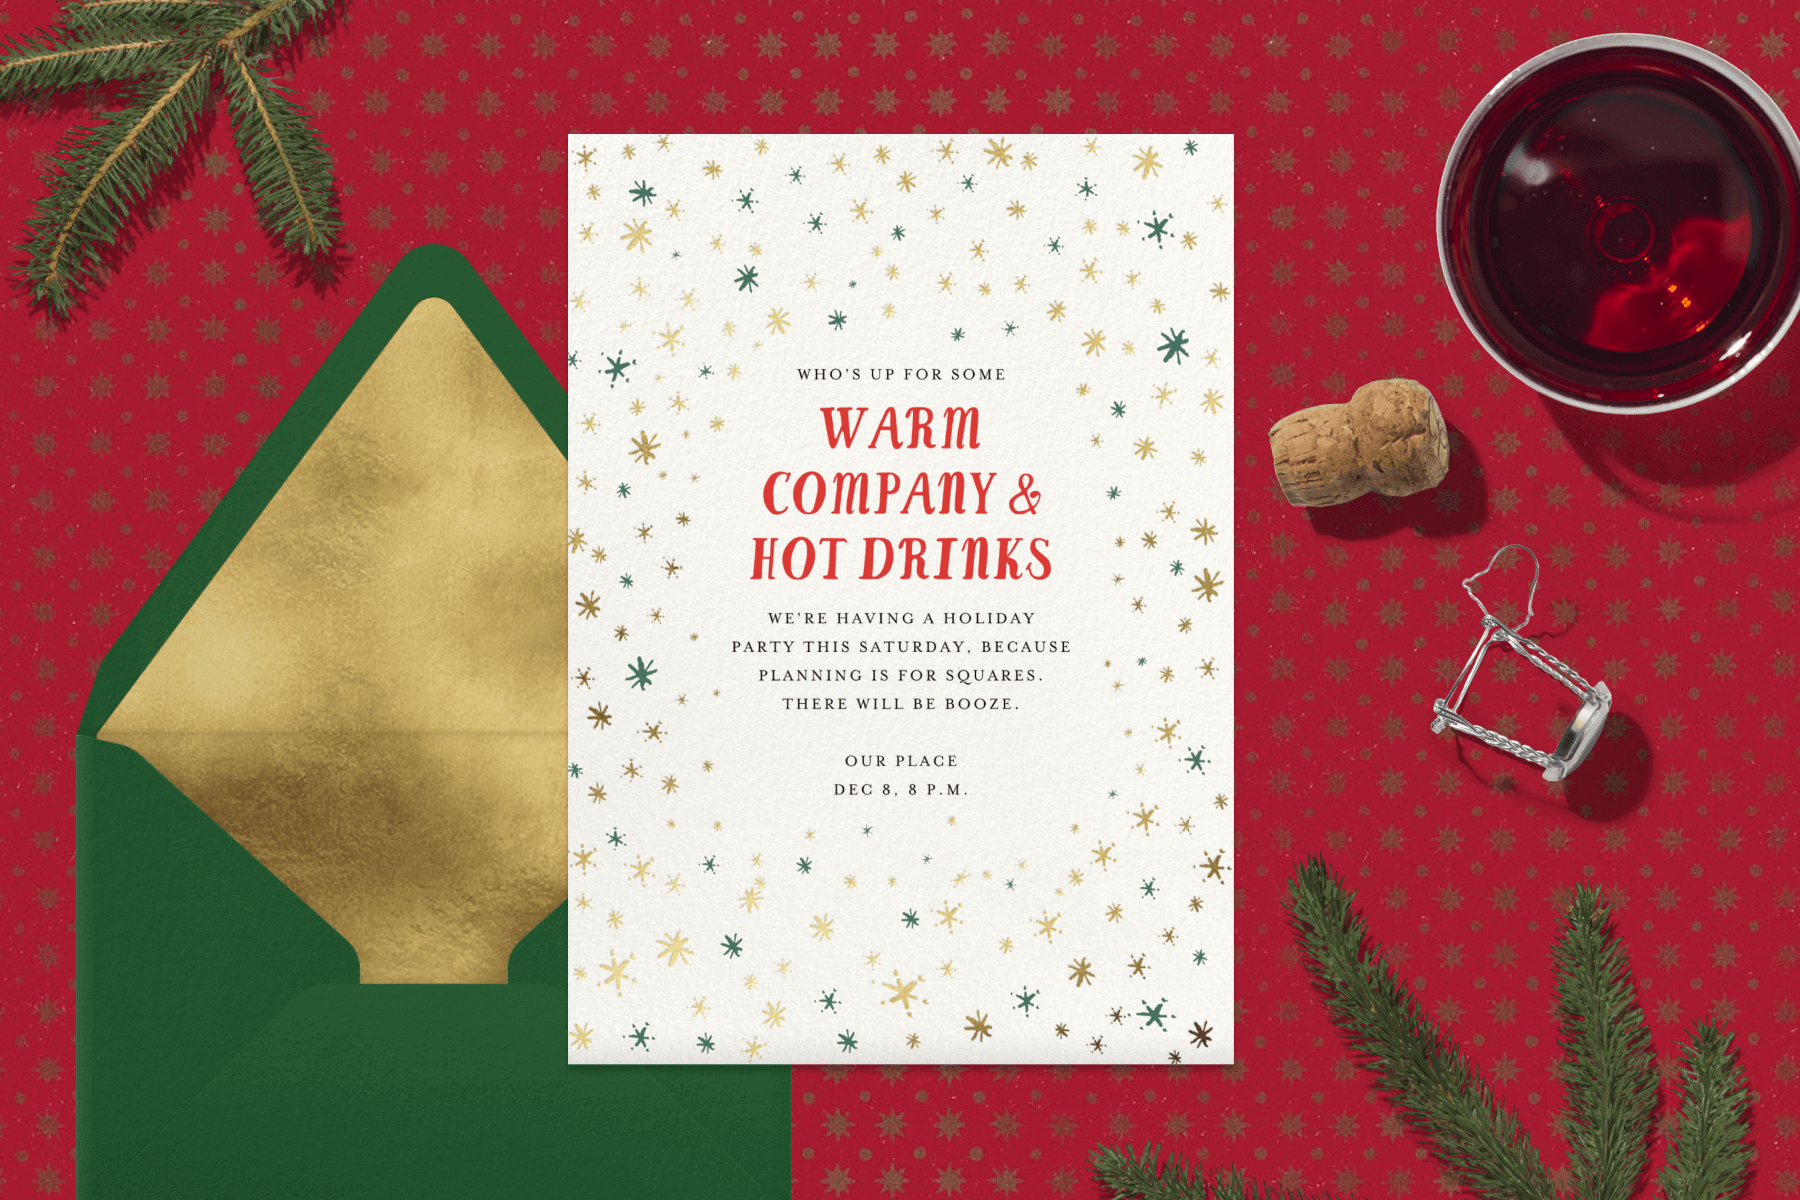 white invitation for “Warm company & hot drinks” with small gold and green asterisk stars lies on a red background beside a red drink, bottle cork, and green fir branches